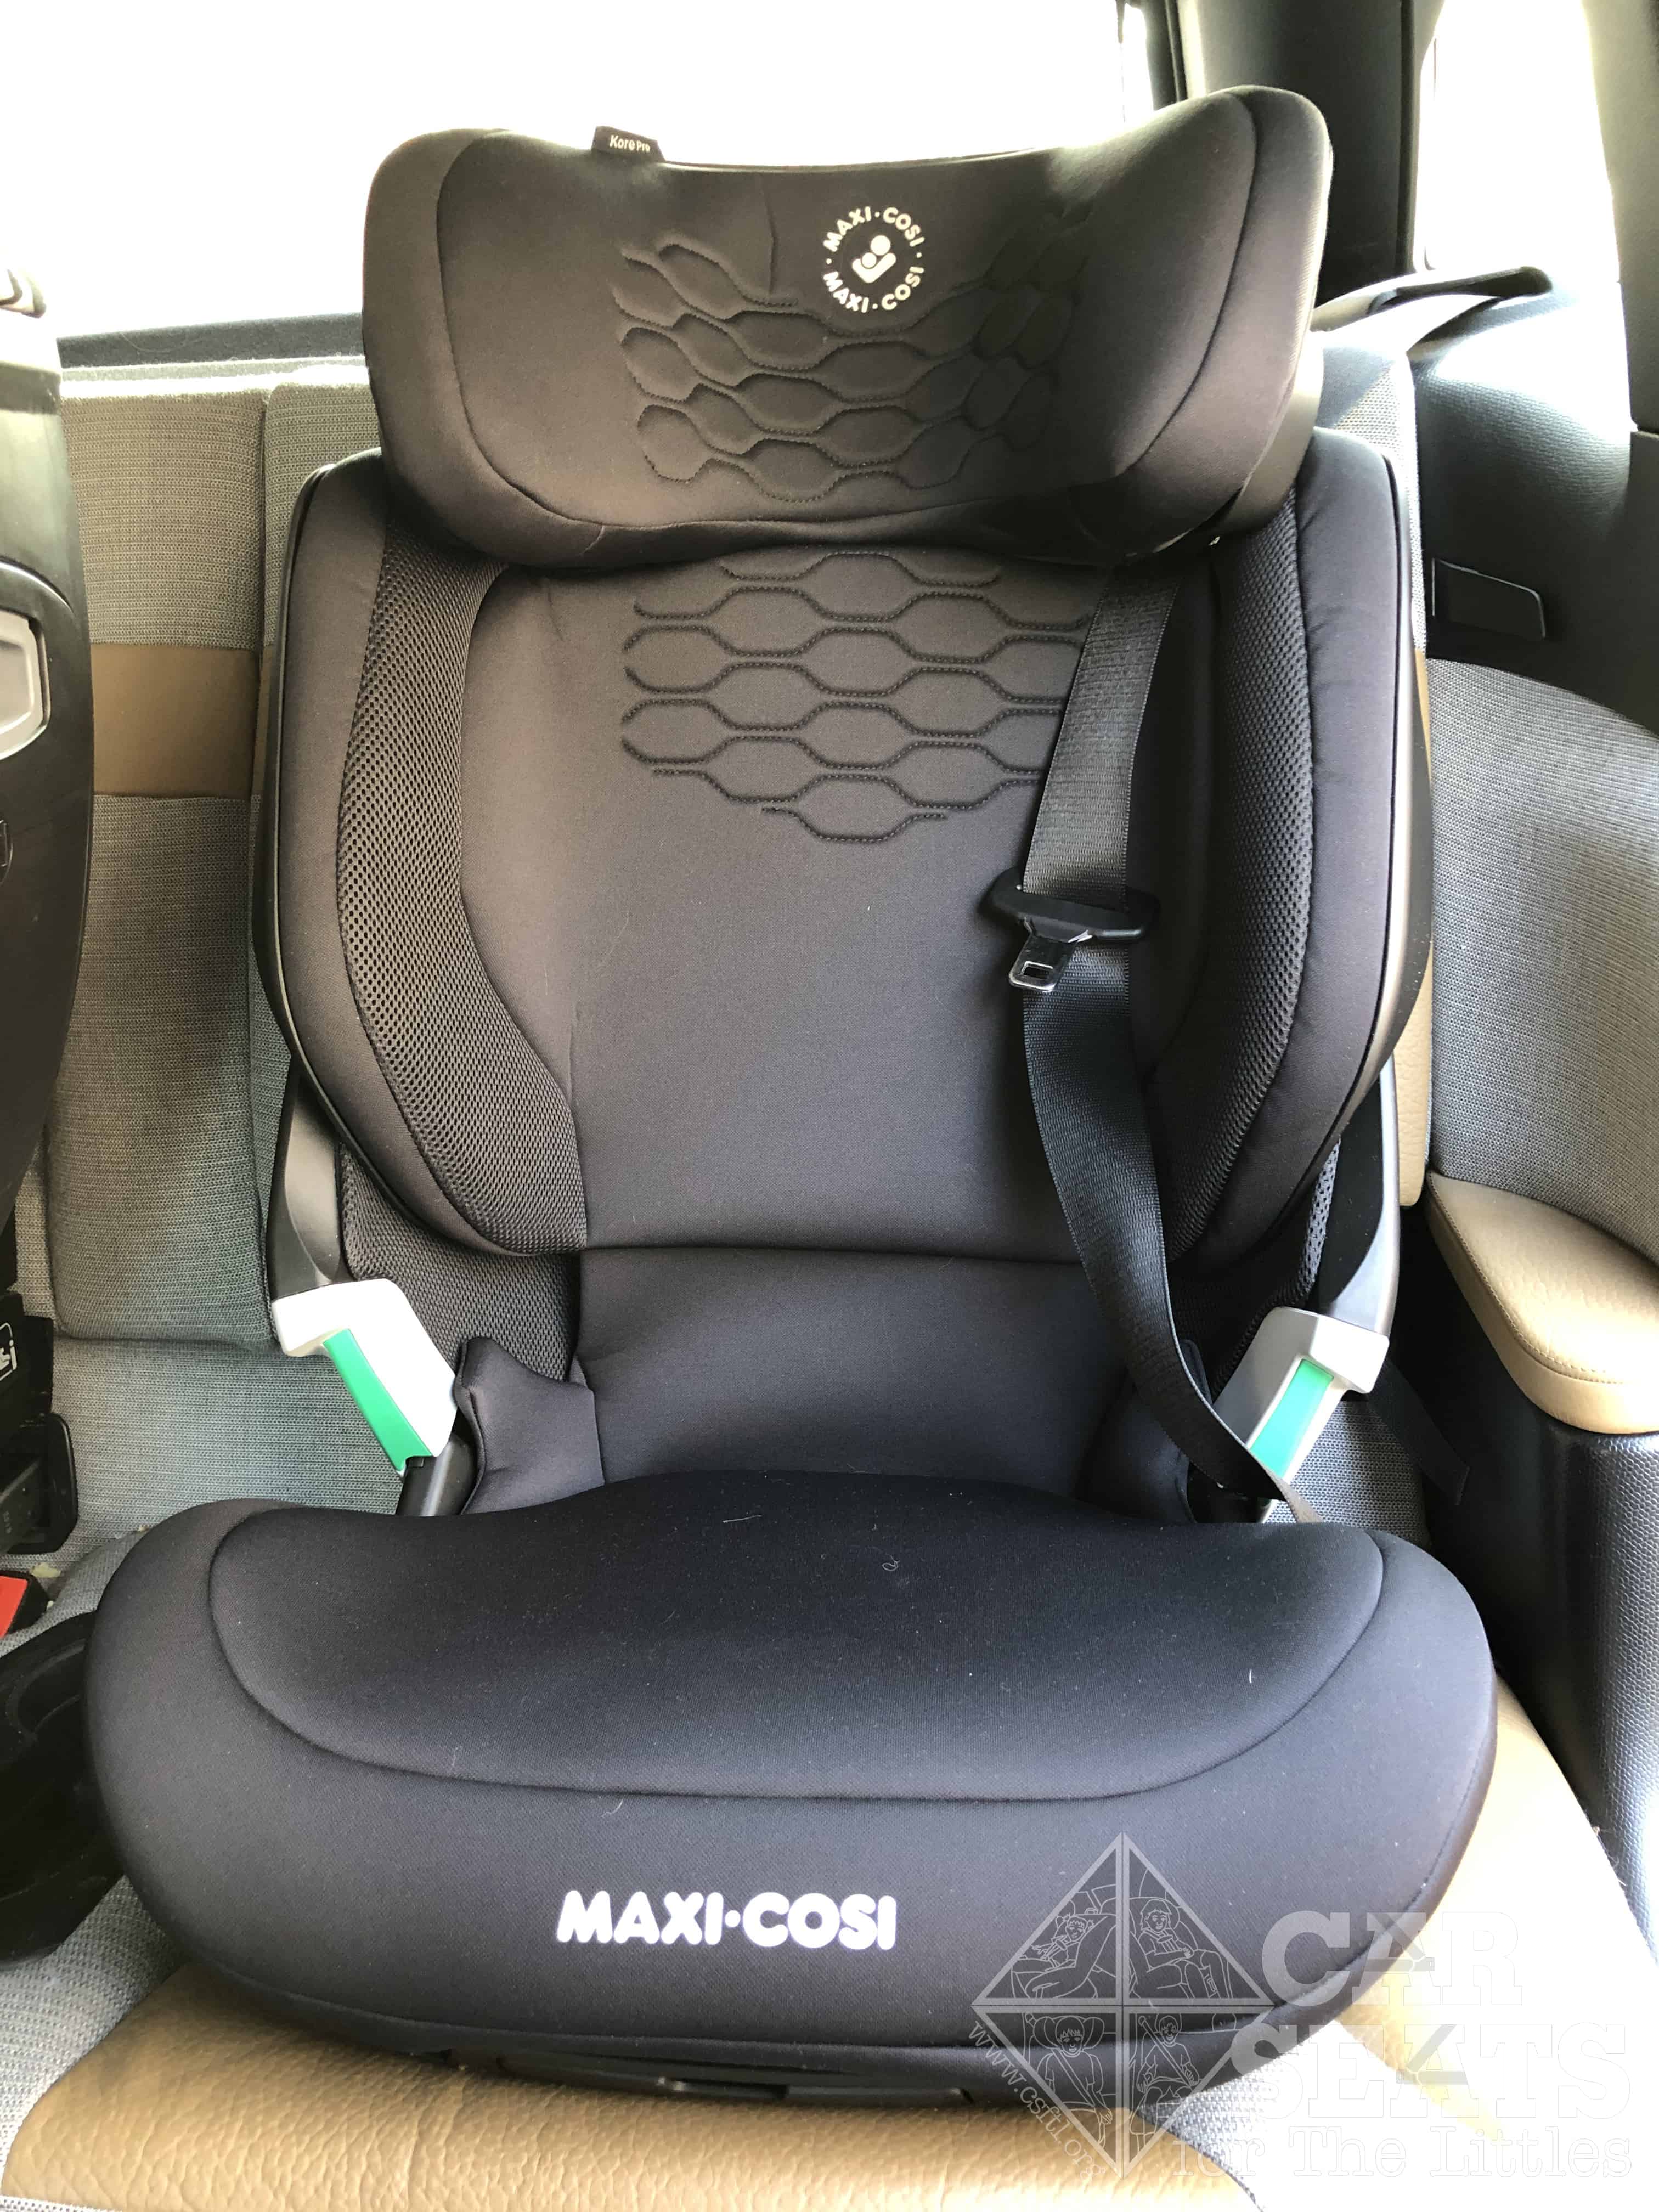 Cosi Kore Pro i-Size Review European Booster Seat - Car Seats For The Littles